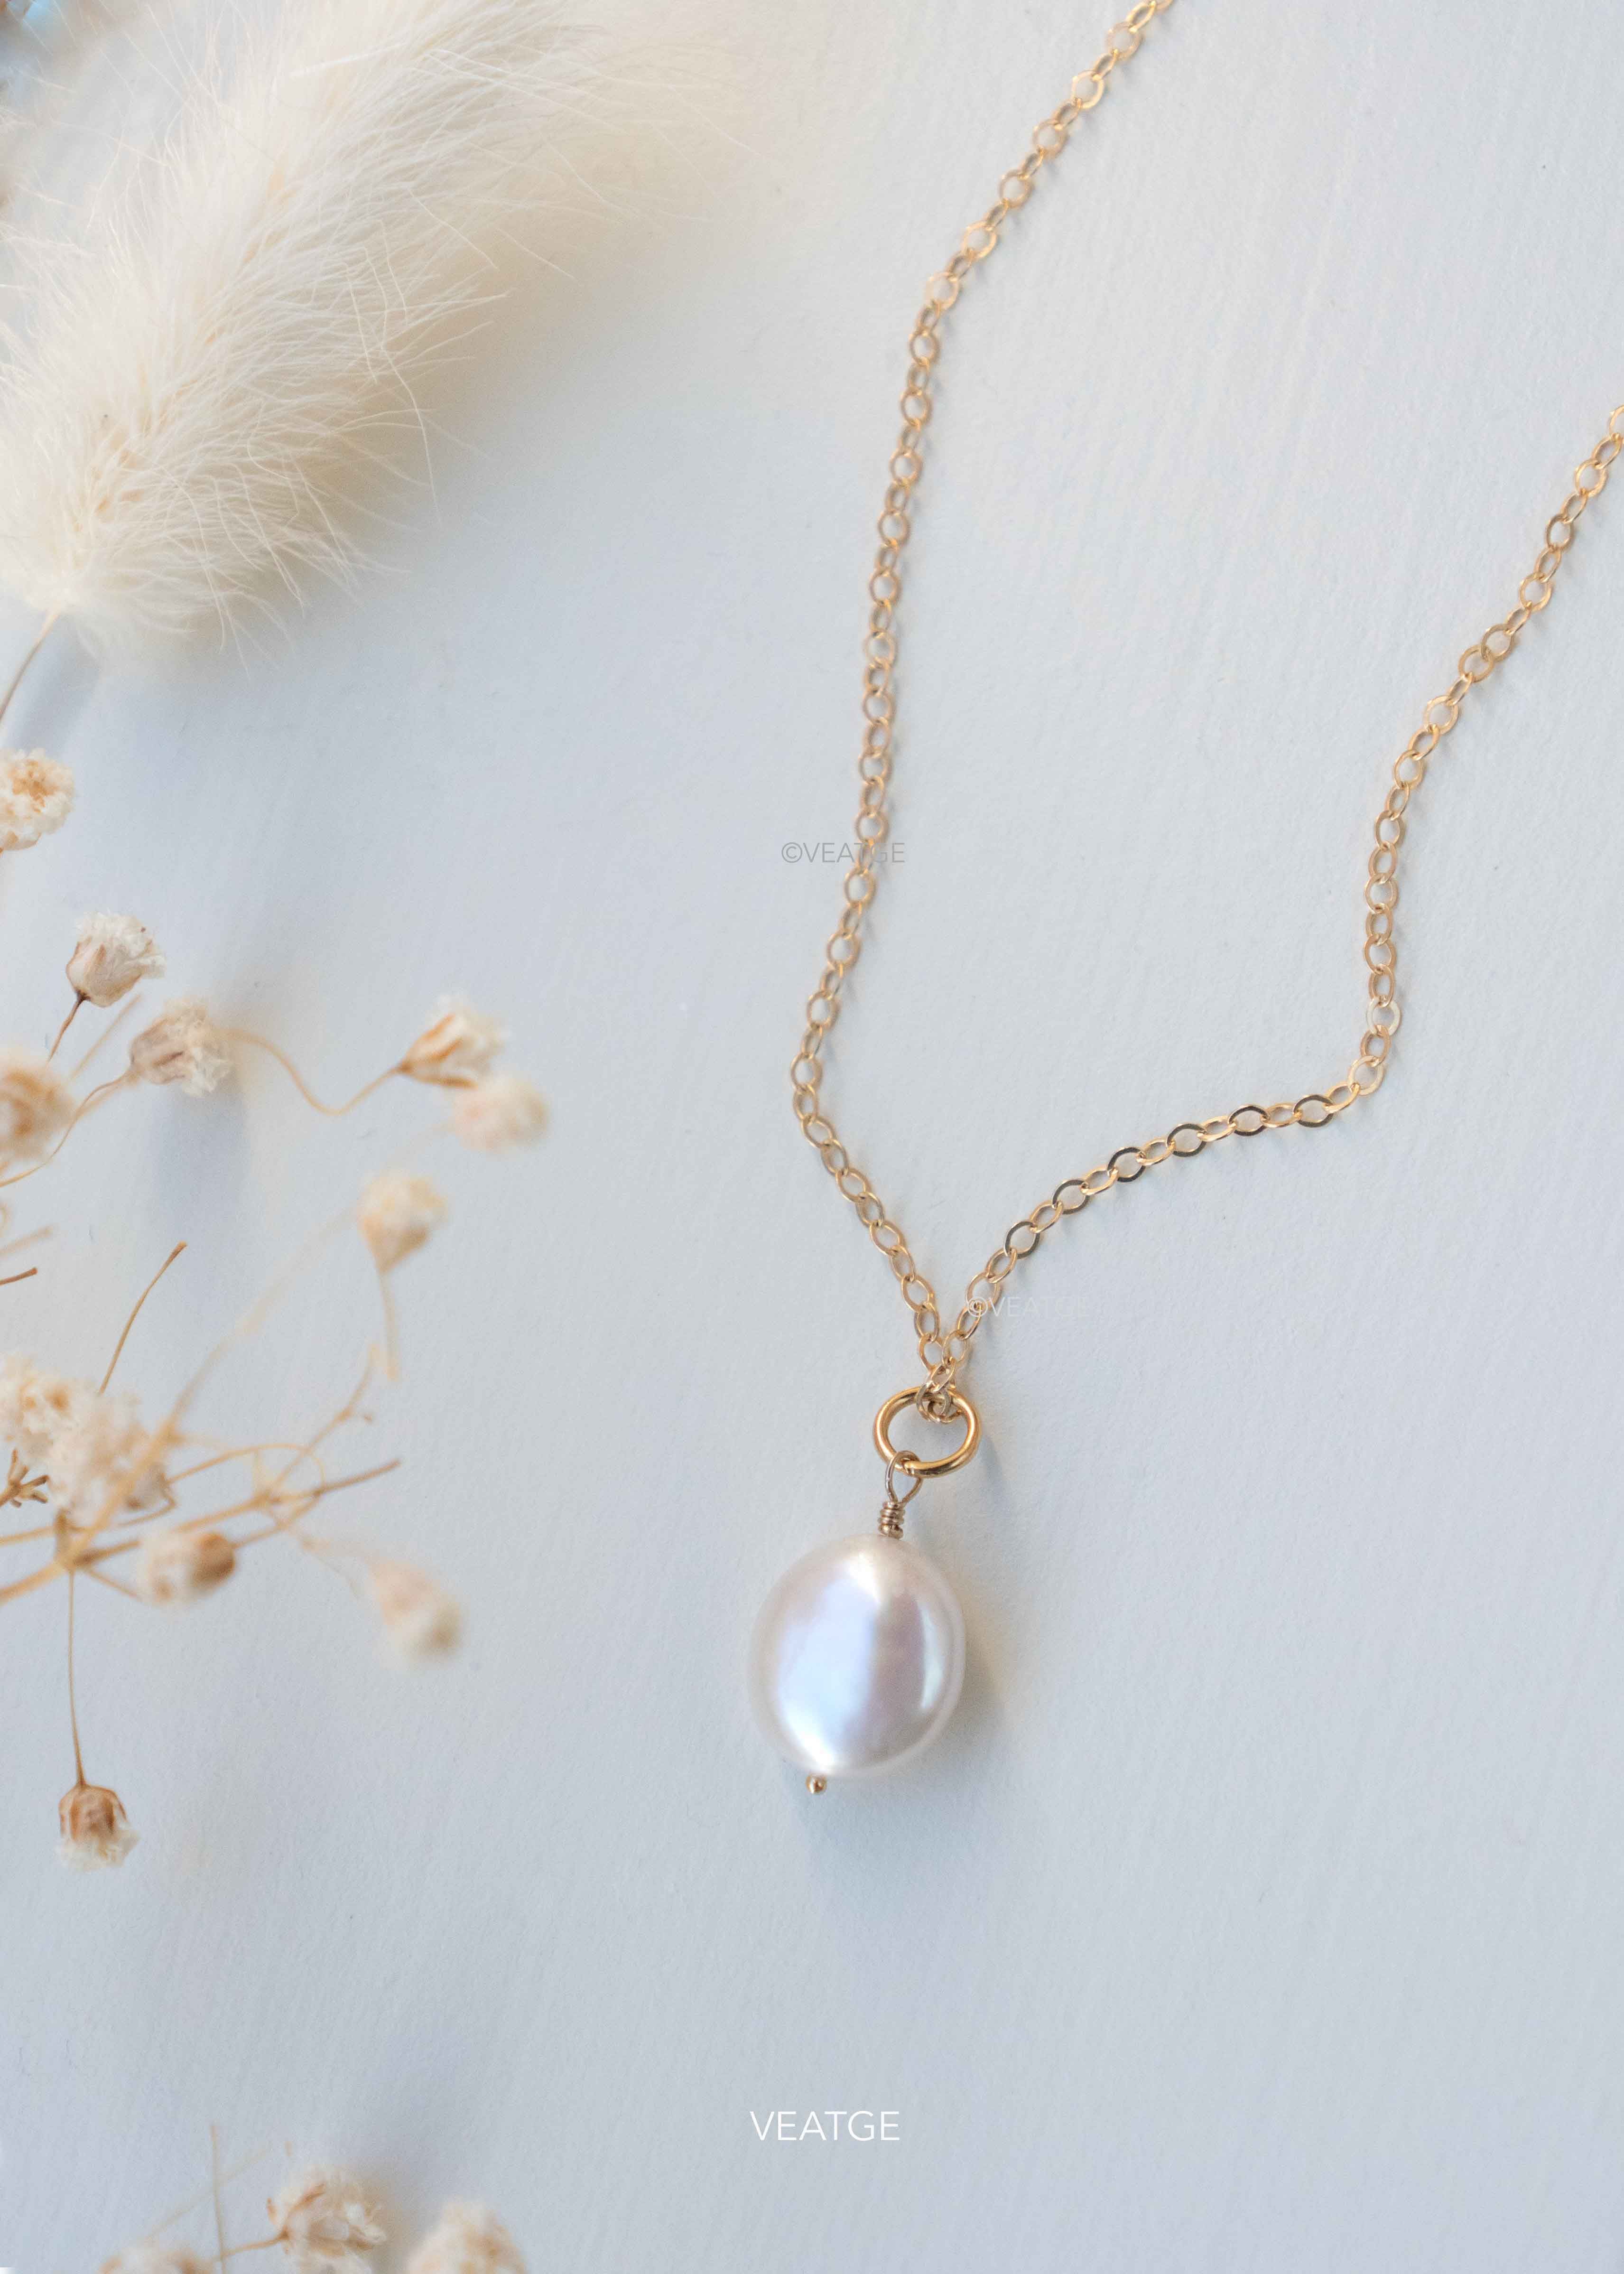 Genuine Coin Pearl Necklace Gold, Flat Pearl Necklace, Large Single Pearl Necklace, Round Pearl Pendant Necklace, Wedding Jewelry, Wedding gift for Women